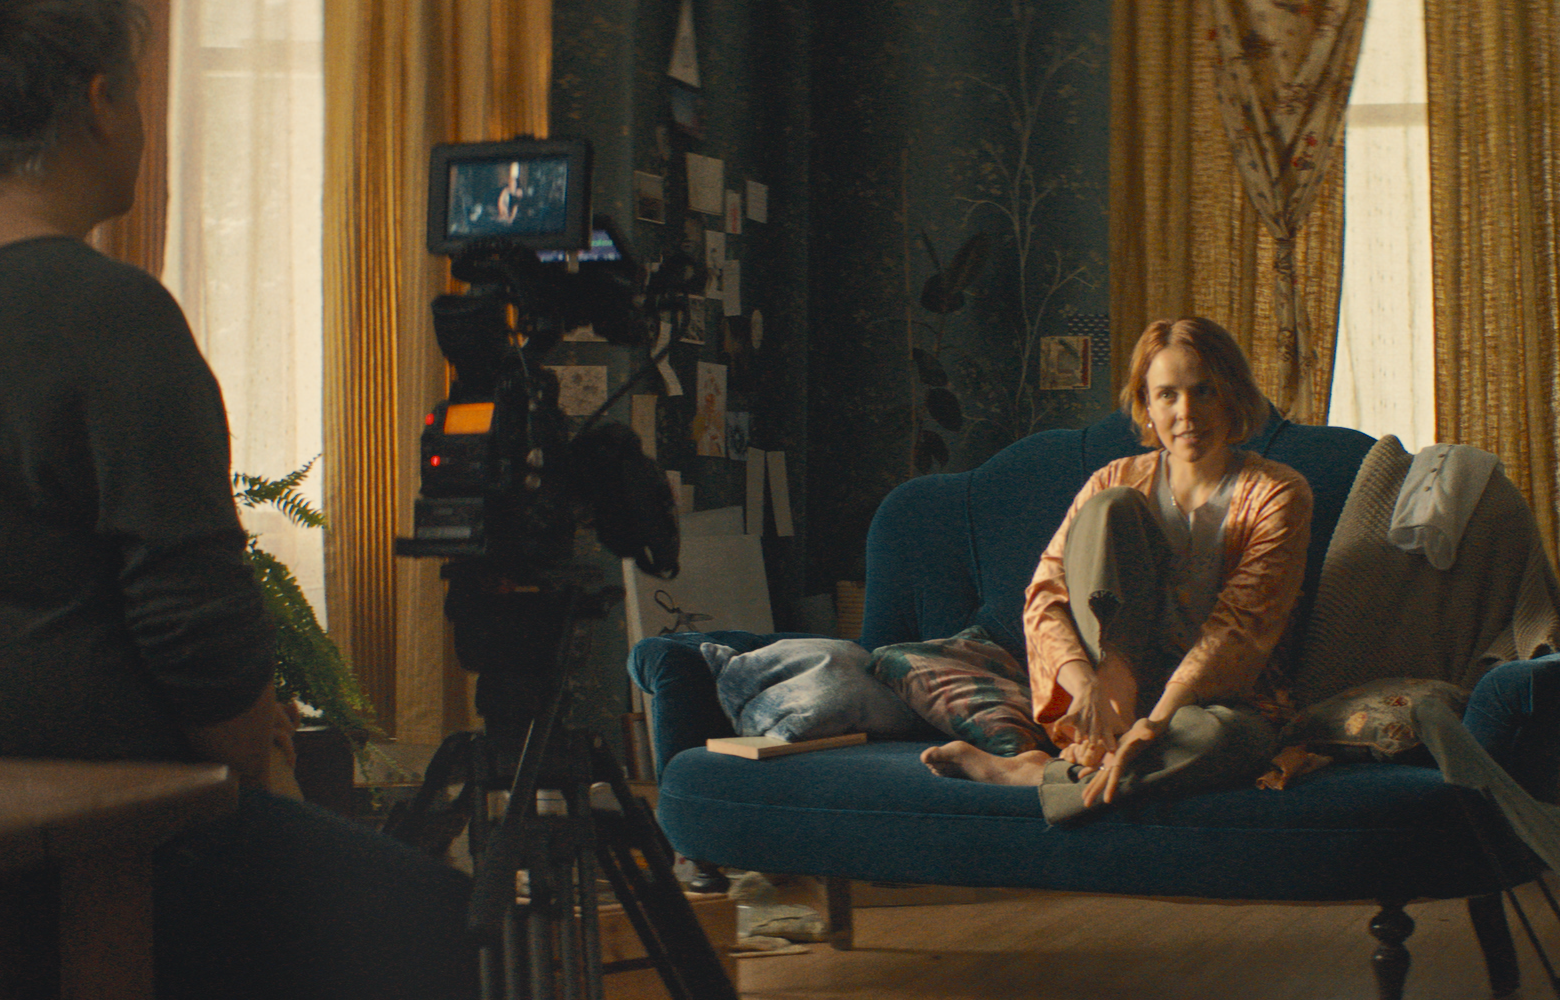 Film still of a young woman sitting cross-legged on a velvet couch in a bohemian room, looking into a camera on a tripod pointing at her in the foreground. The camera operator’s back is partially in frame.